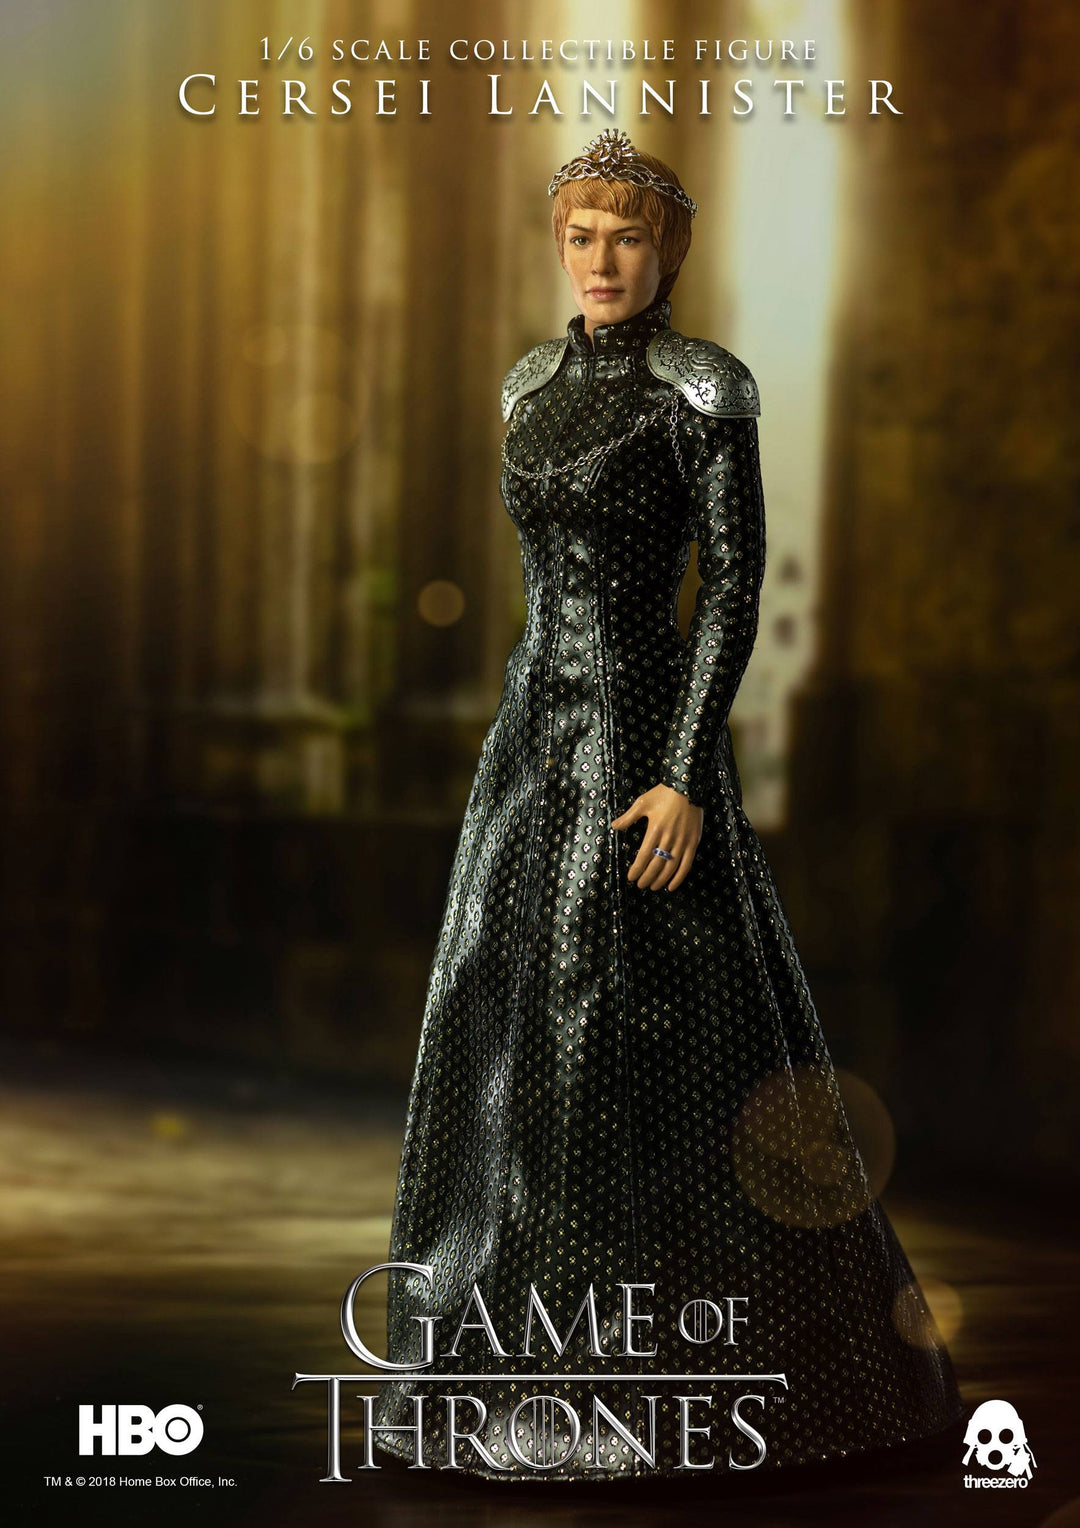 Game of Thrones Cersei Lannister 1/6th Scale Figure